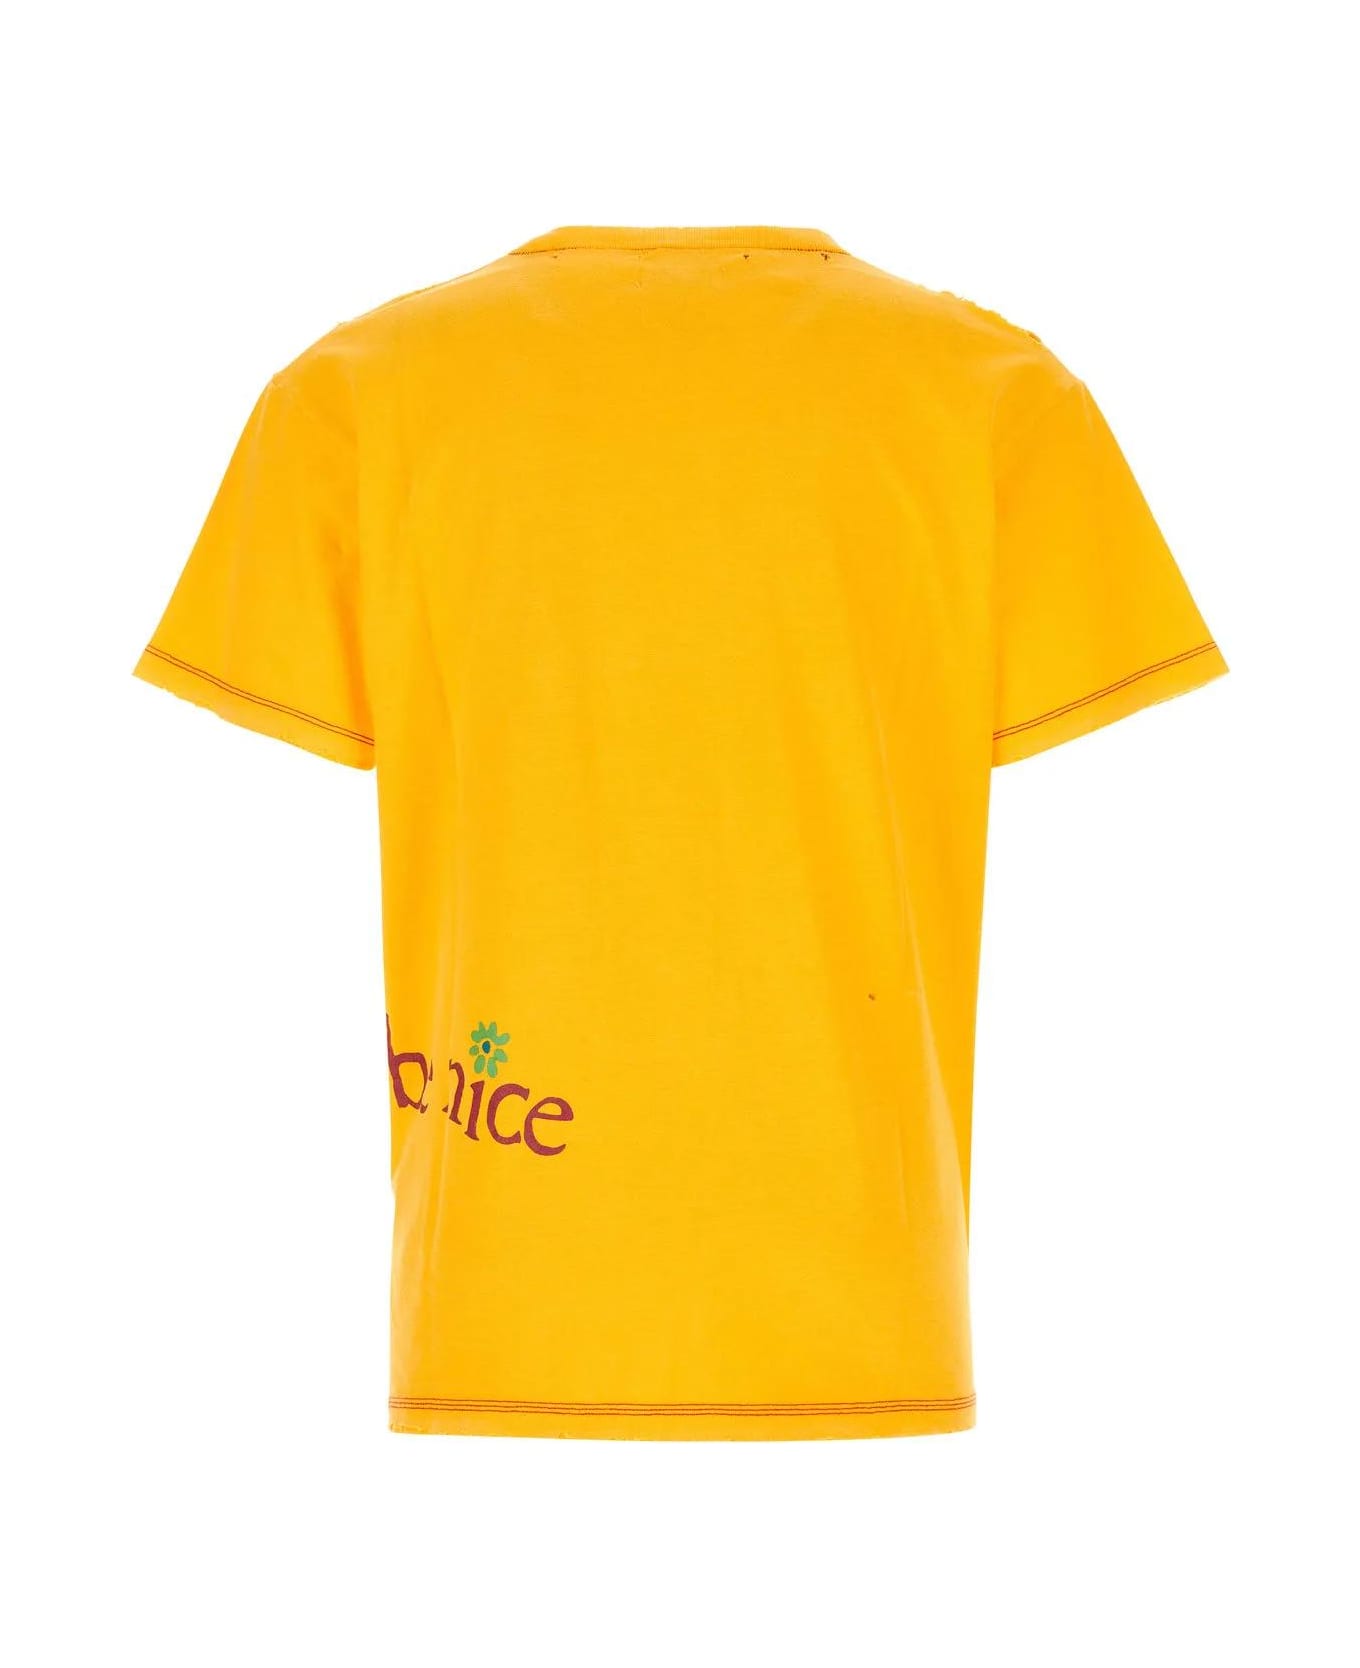 ERL Yellow Cotton Blend T-shirt - Yellow Tシャツ